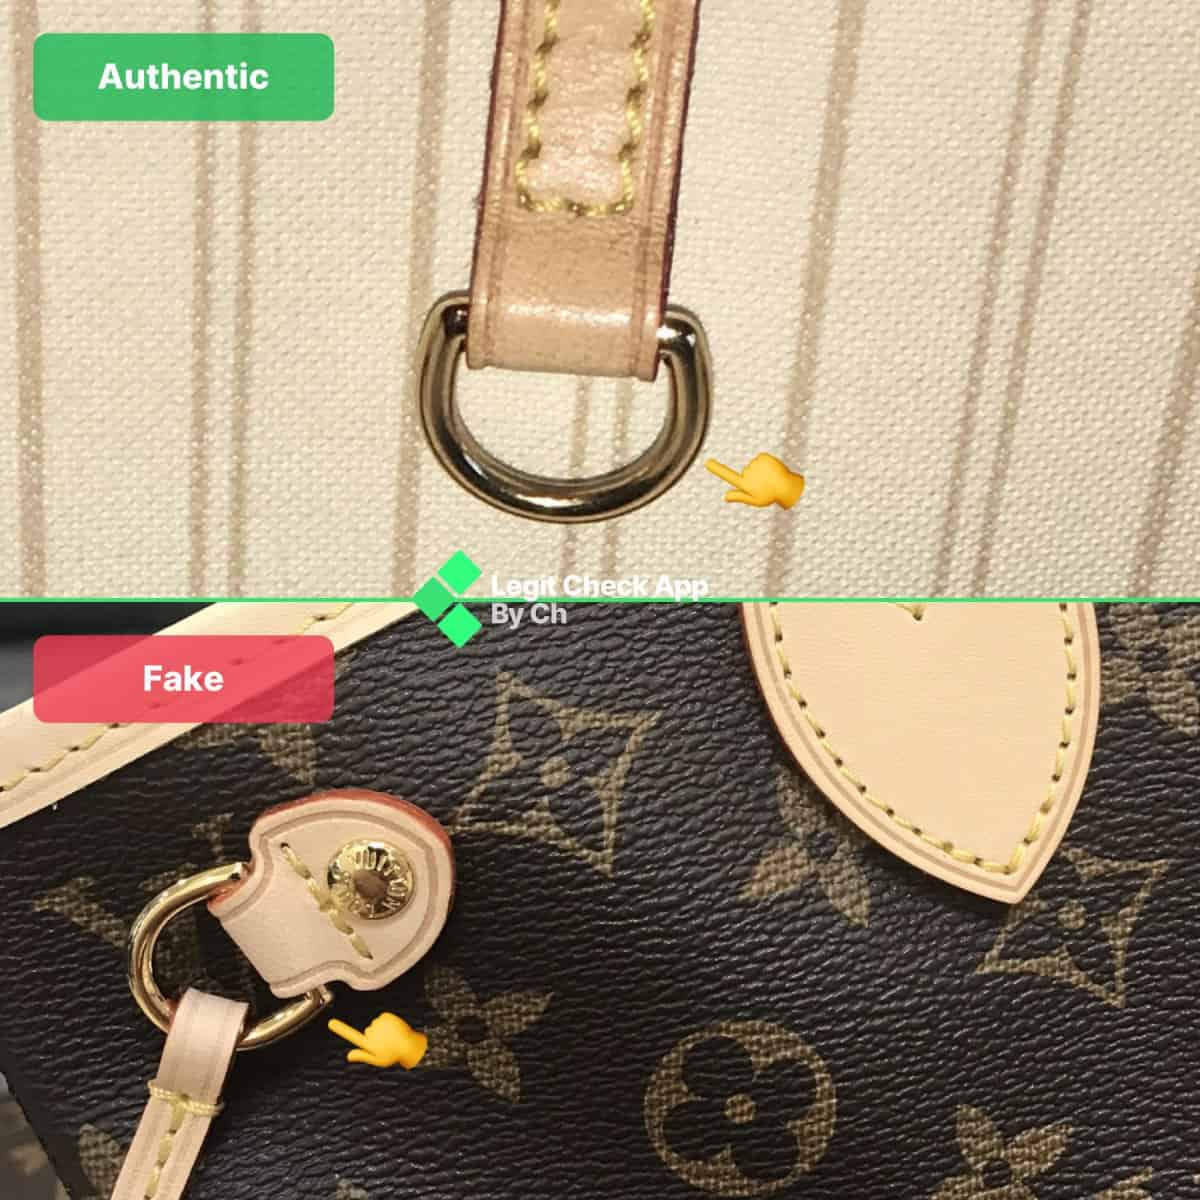 Louis Vuitton Neverfull Authentication: Real Vs Fake (2023)